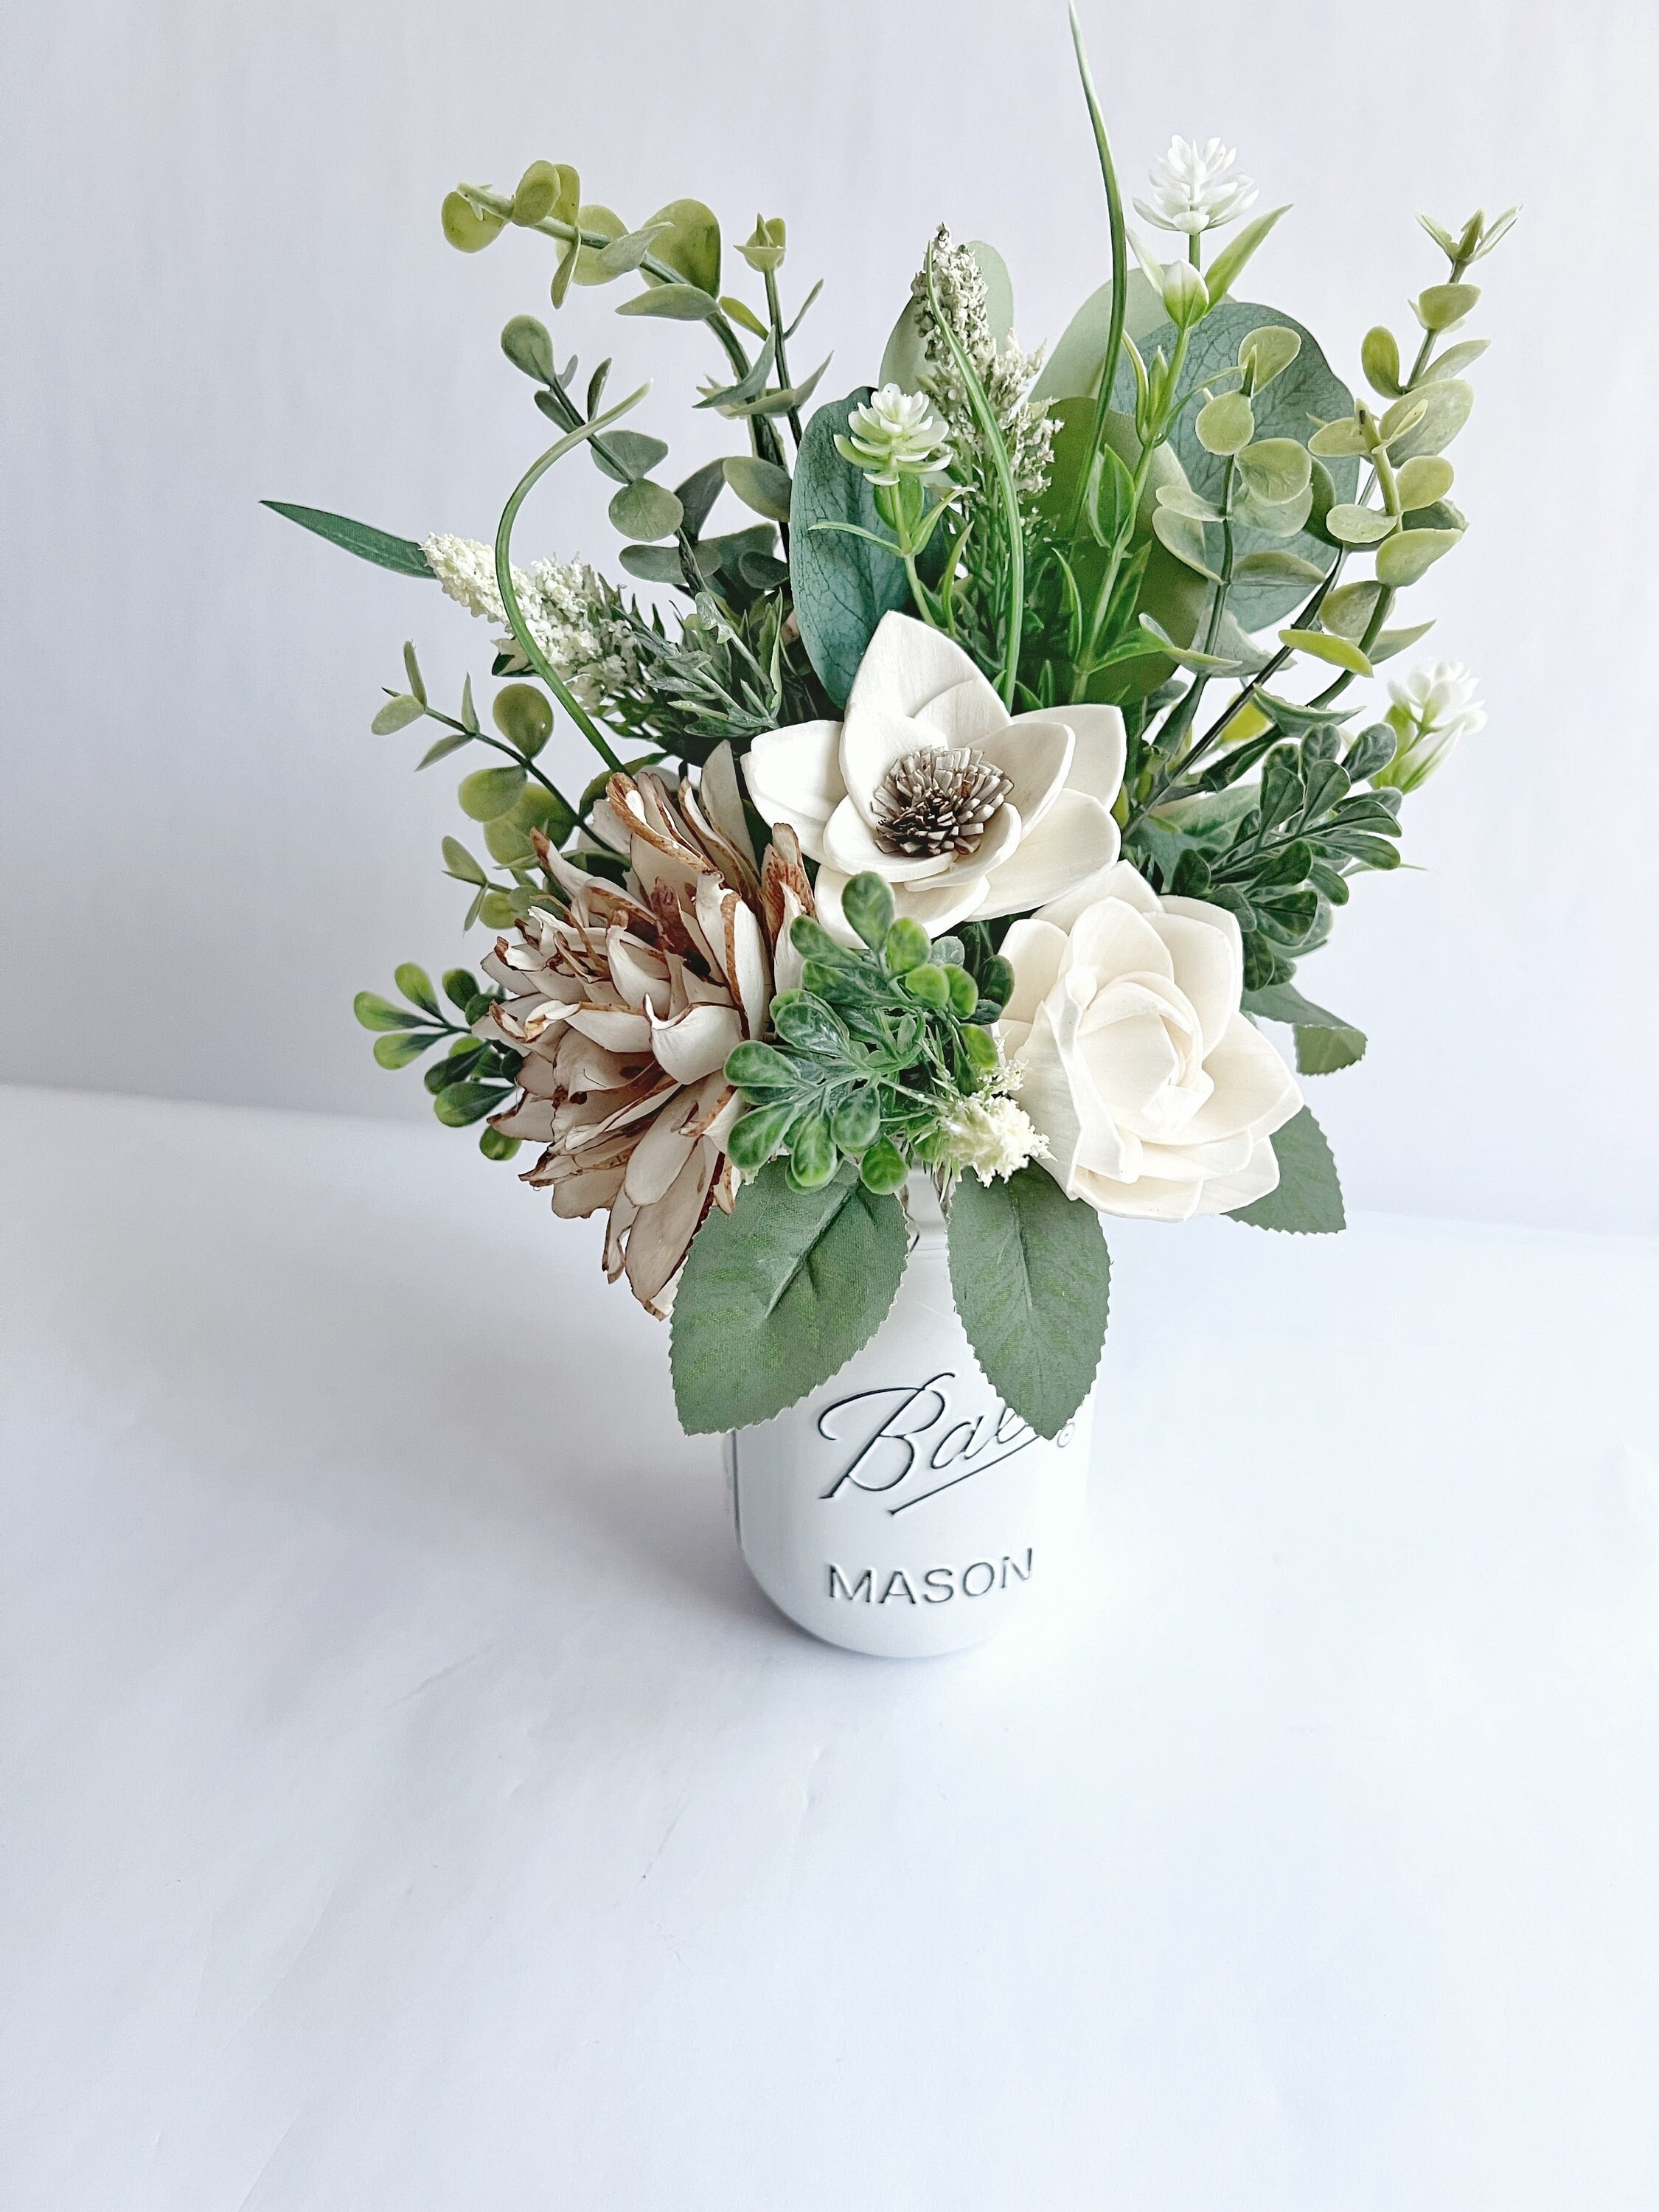 Dried Flowers Neutral and White Arrangement, Airy Dry Real Floral